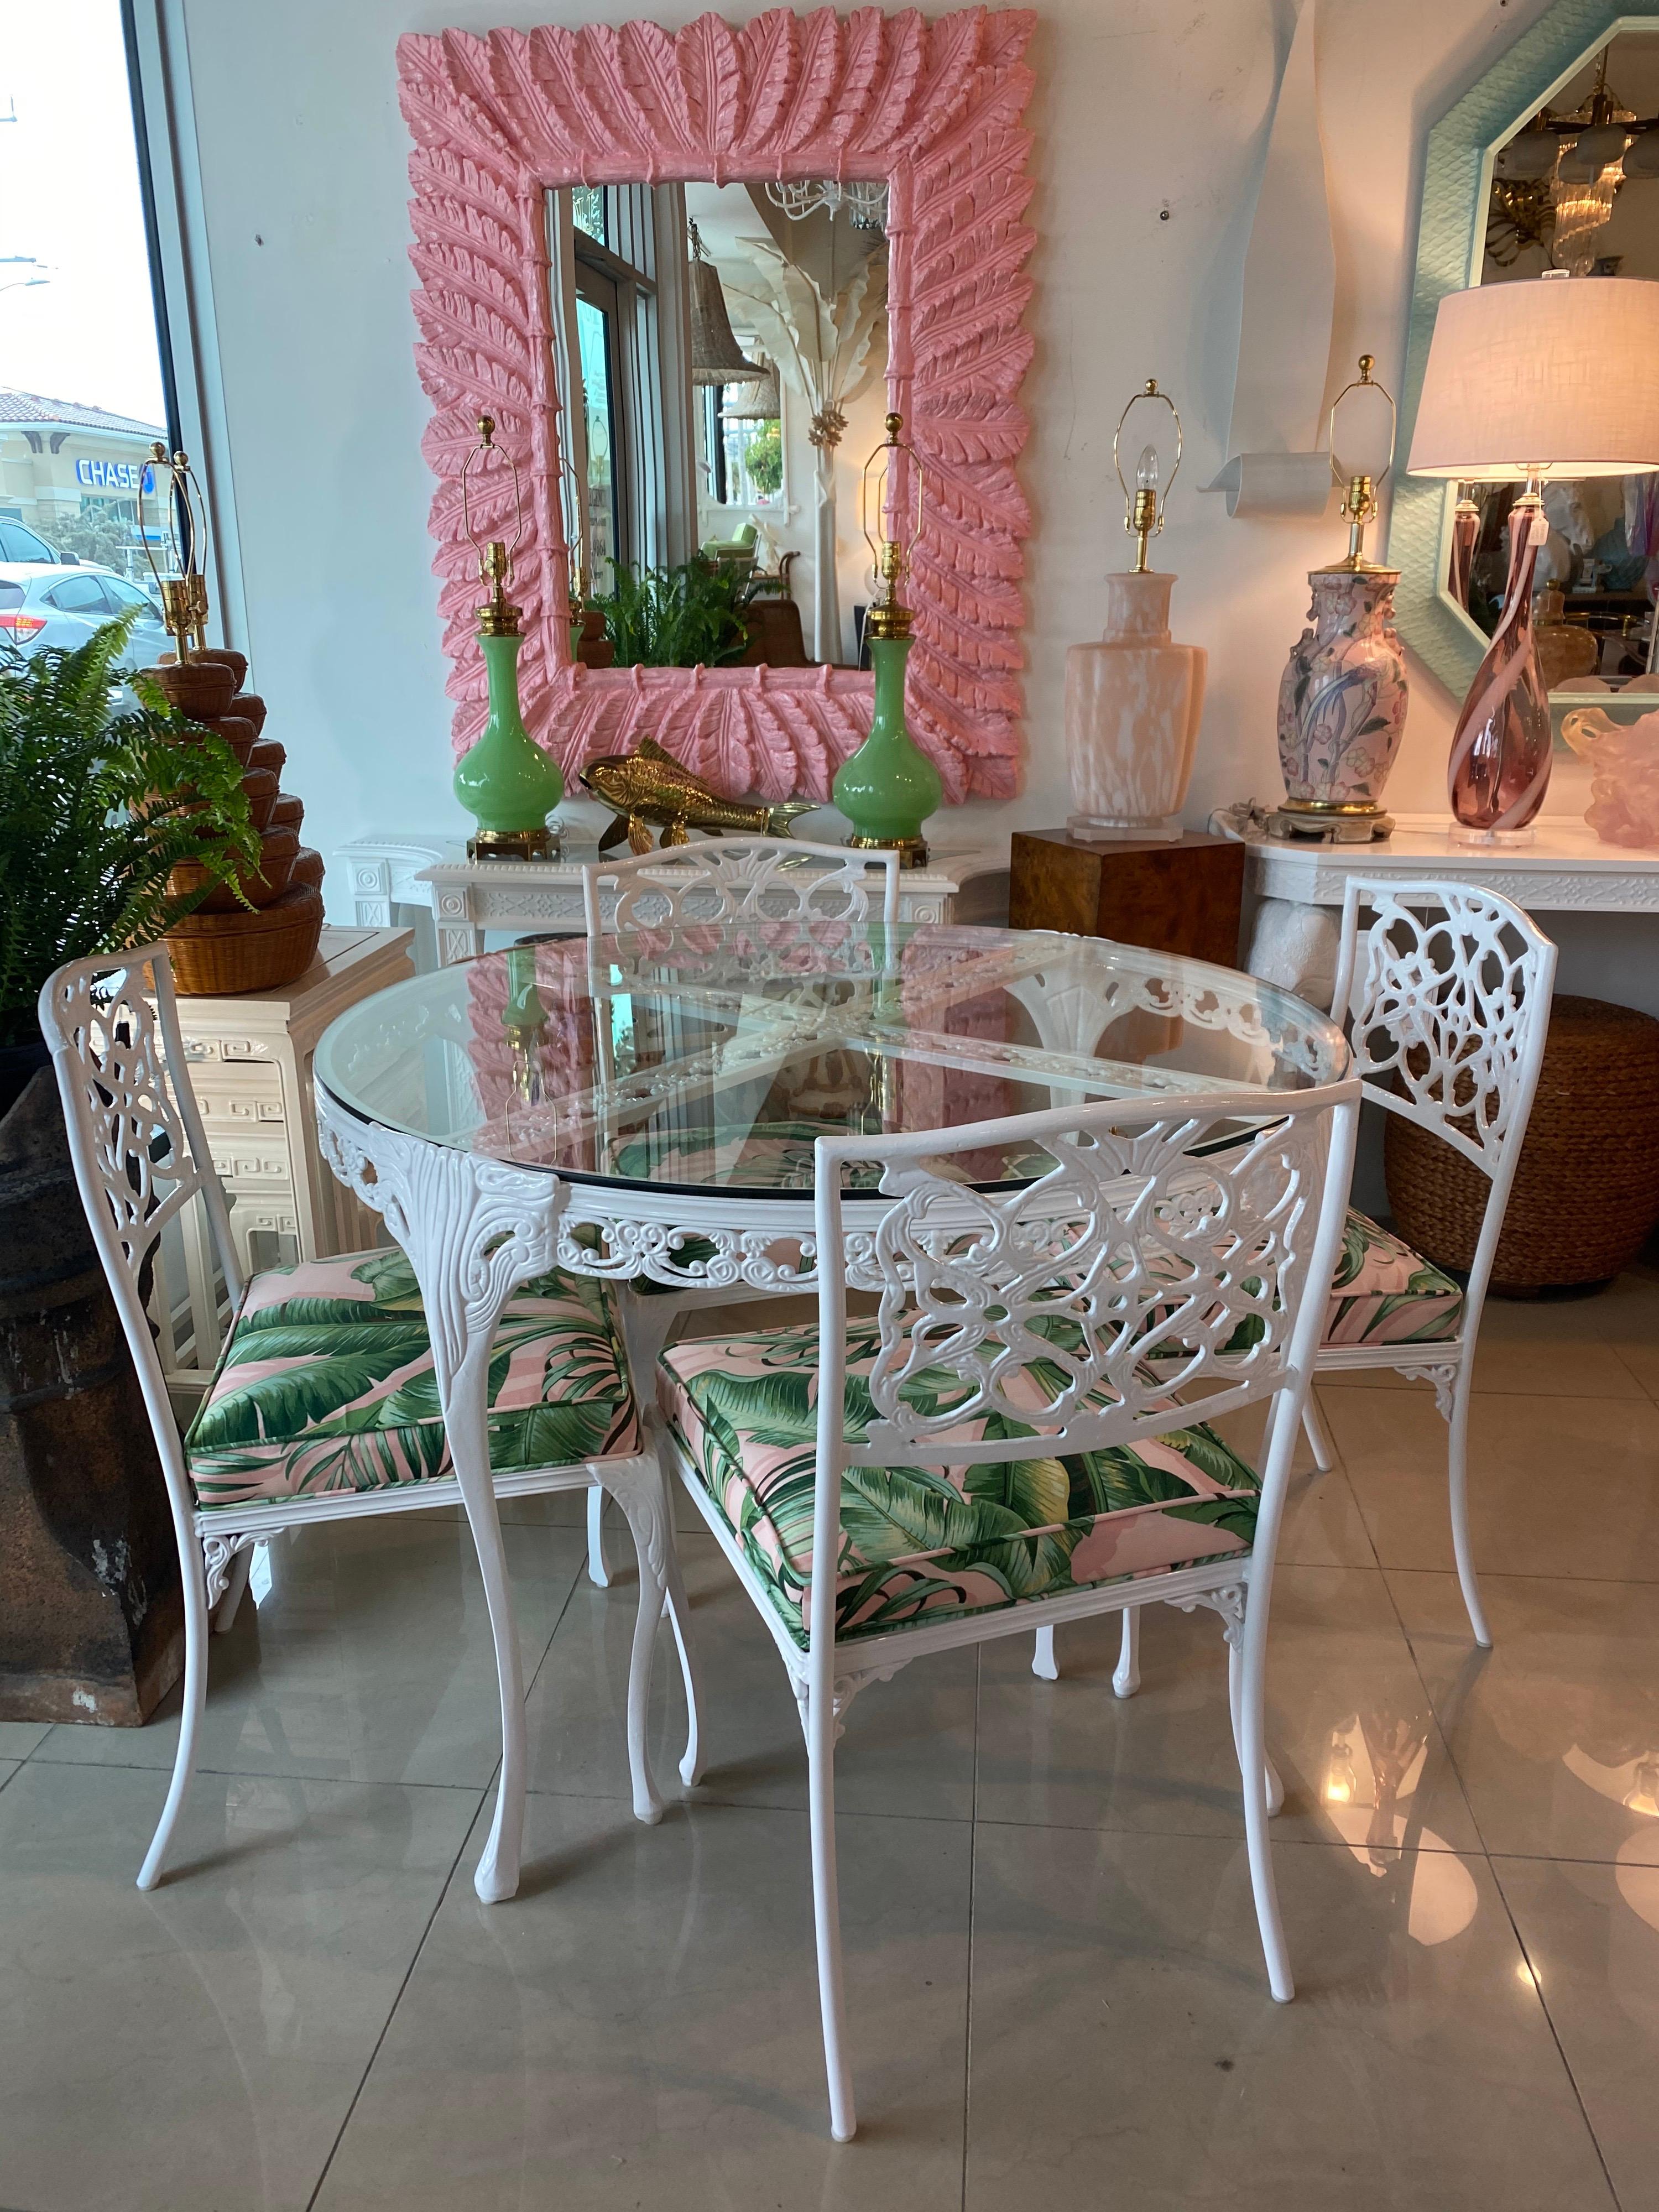 Beautiful vintage patio outdoor set. This can be placed indoors or outdoors. Set includes dining table and 4 chairs. The glass top is vintage and may have some scratches, scuffs but no chips or breaks. This set has been newly powder-coated in white.